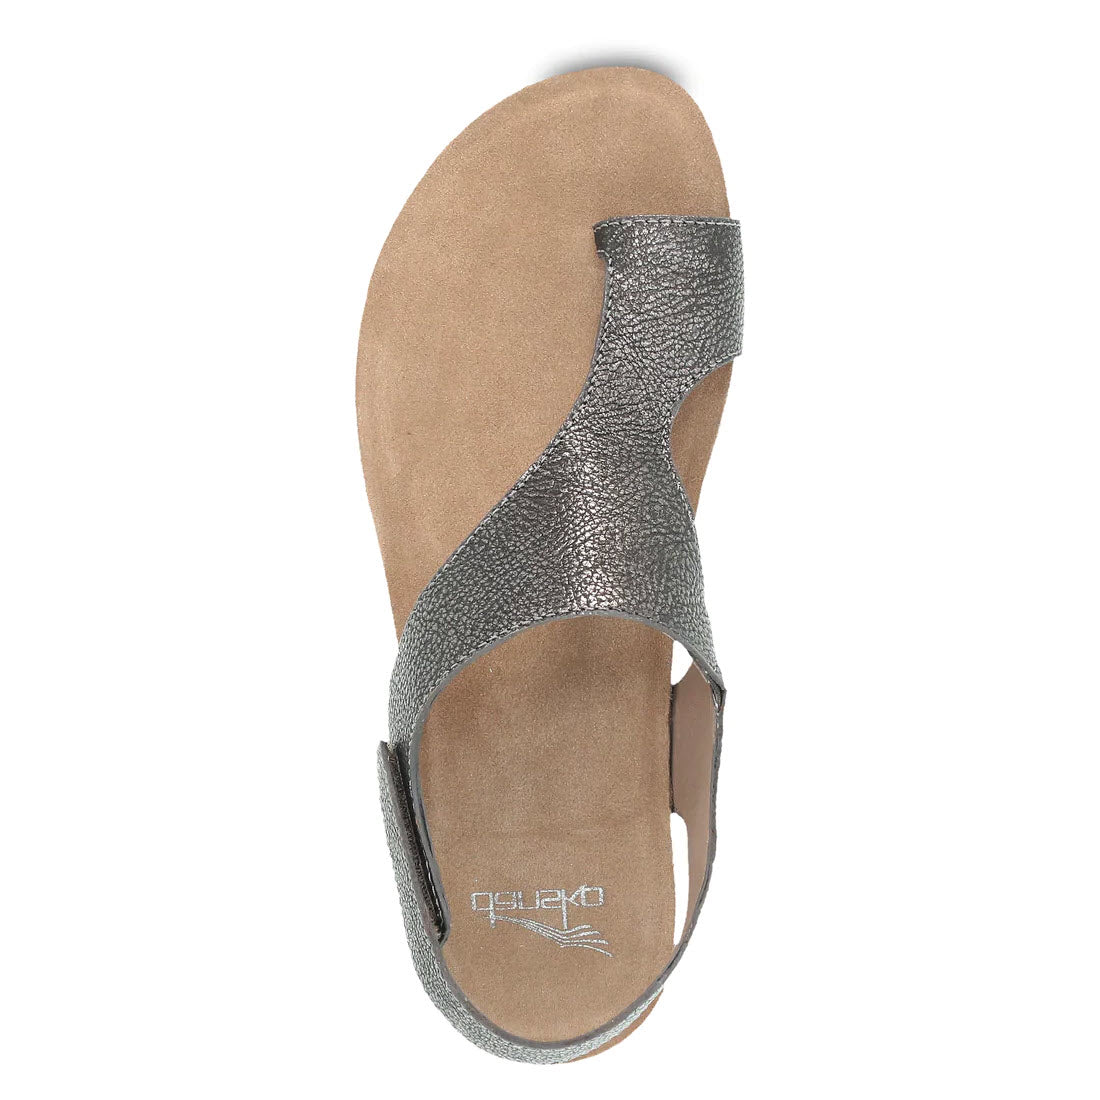 Top view of a silver Dansko Reece sandal with an open toe design and an asymmetrical strap.